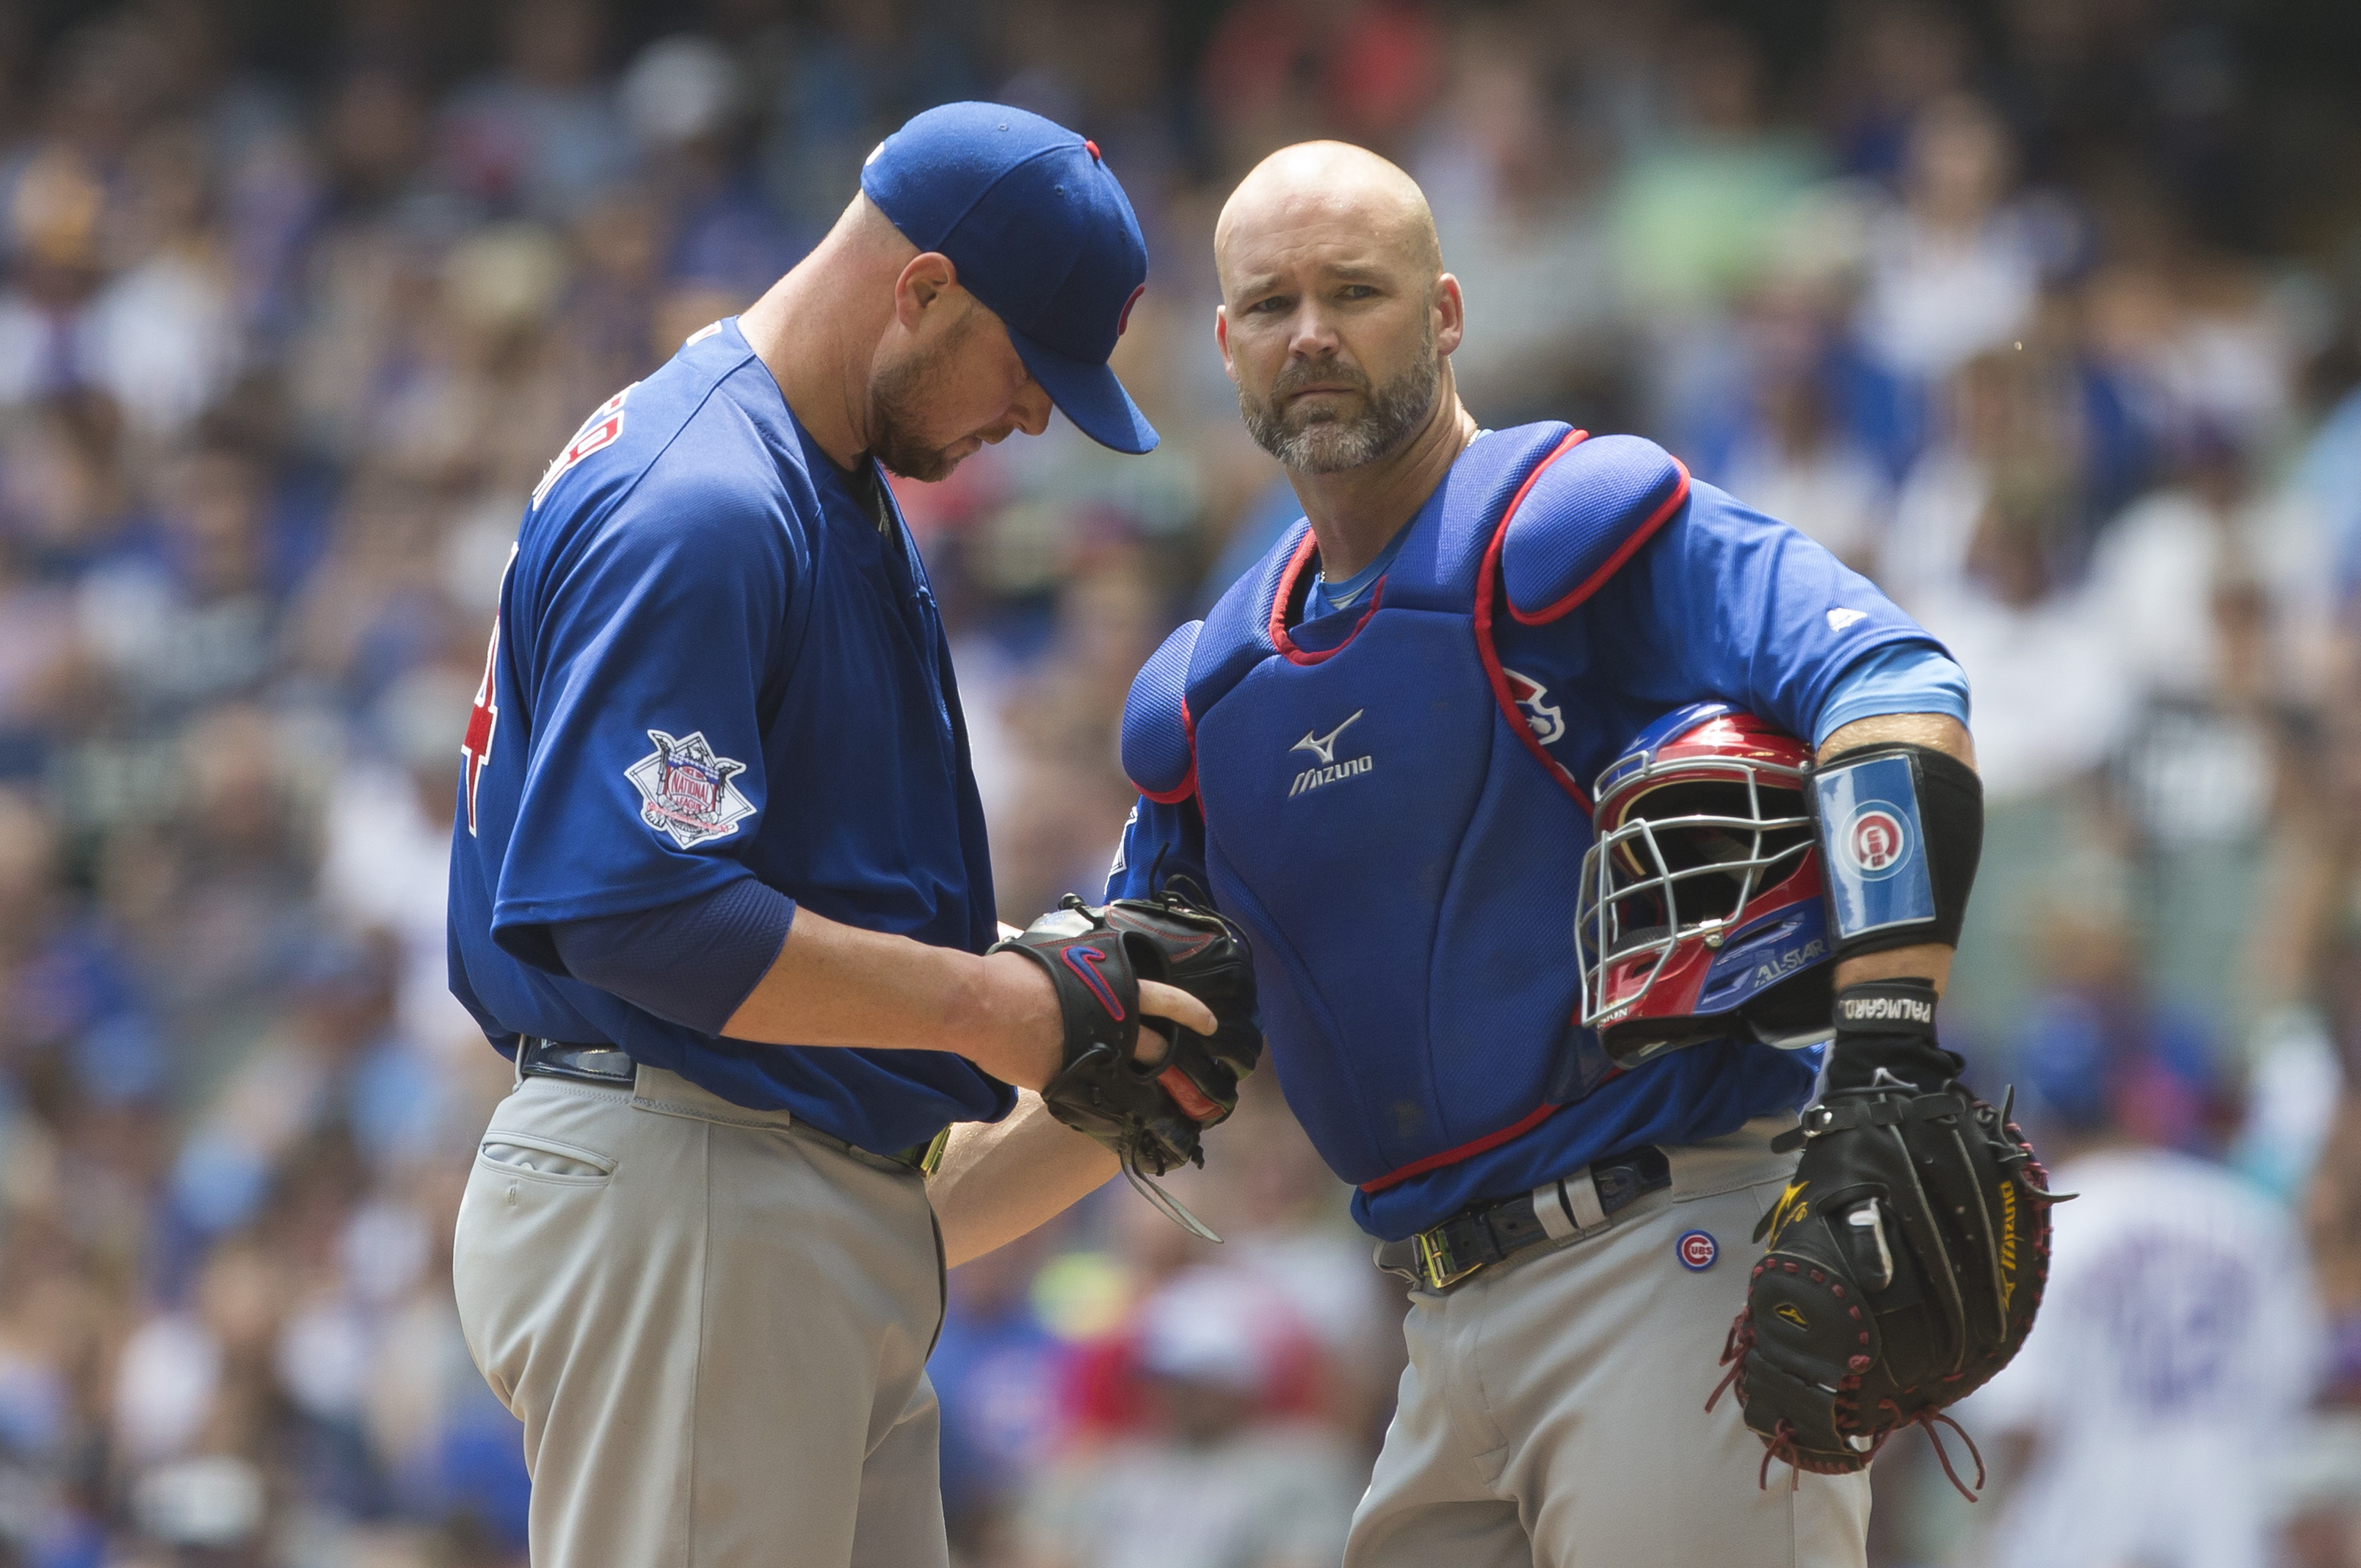 Cubs Hire Former Catcher David Ross as Their New Manager